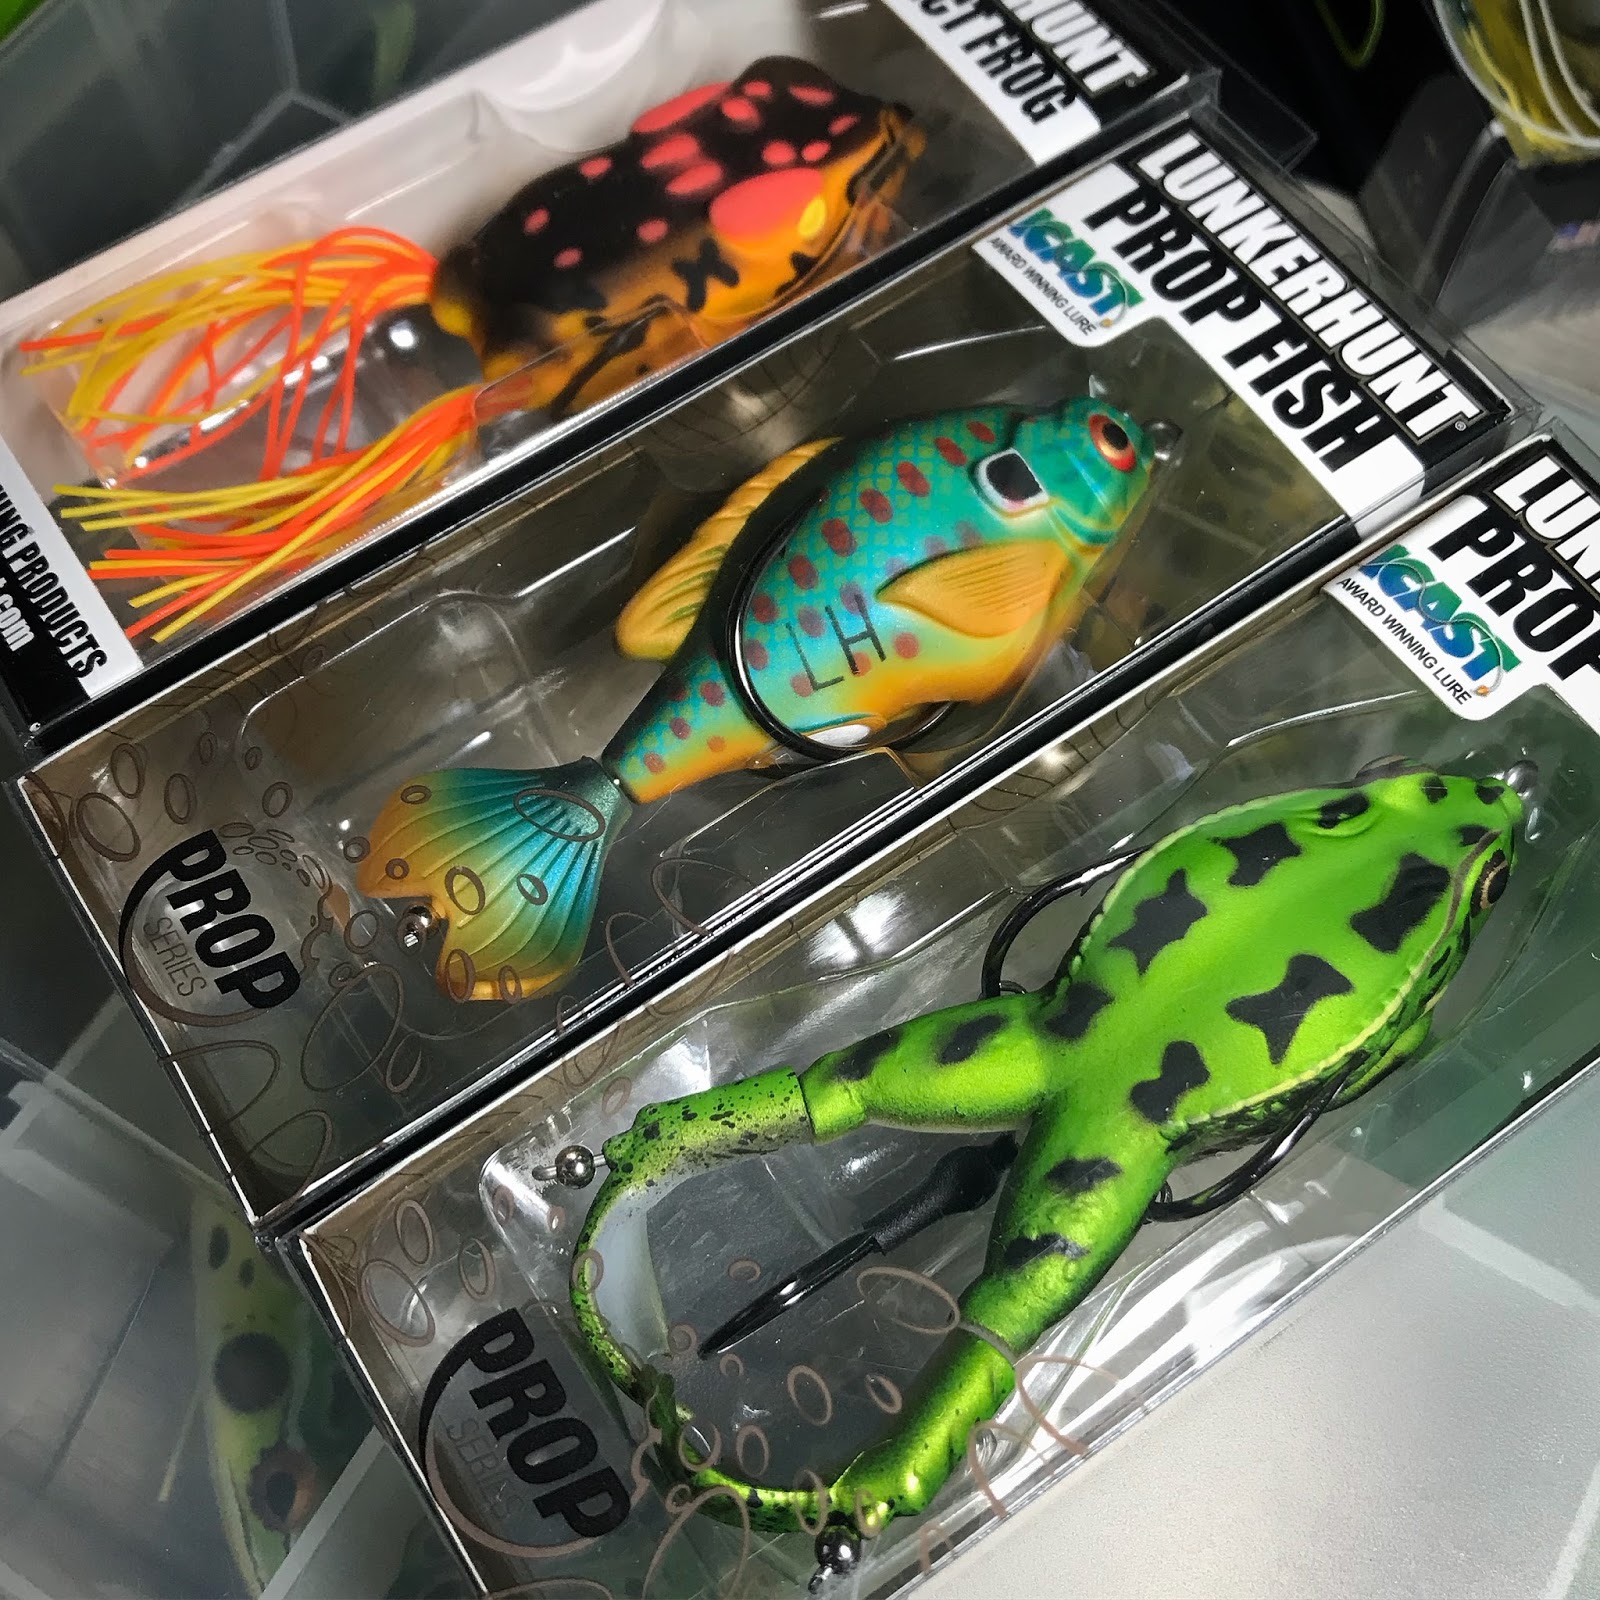 Bass Junkies Frog Pond: Frog Addicts Unboxing Review - LunkerHunt